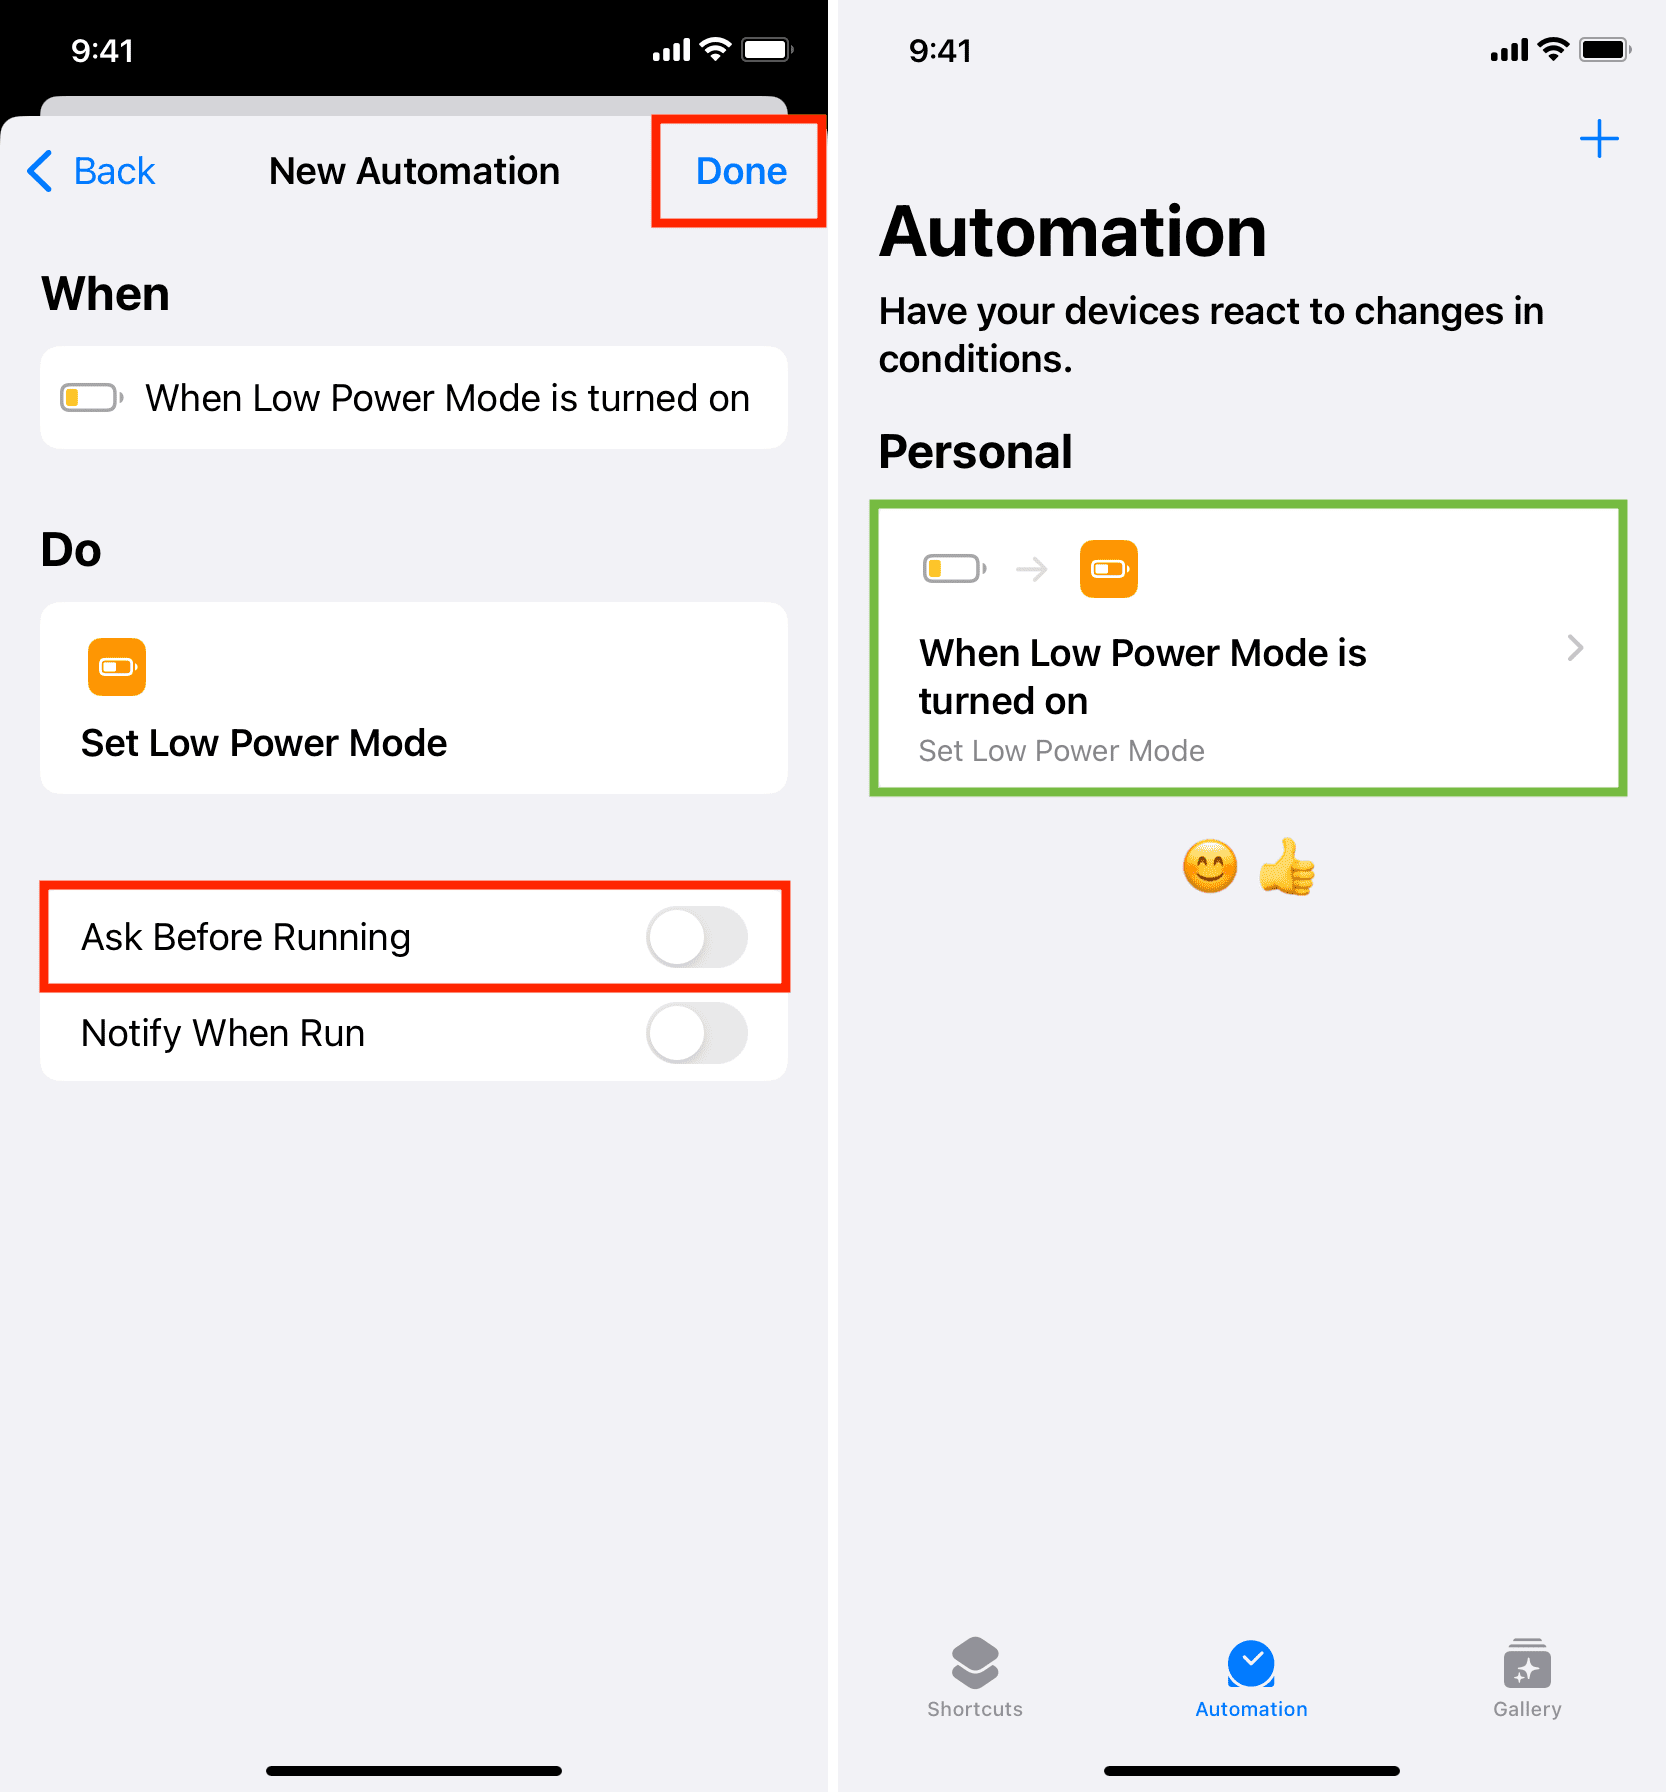 Successfully created an Automation to keep Low Power Mode always enabled